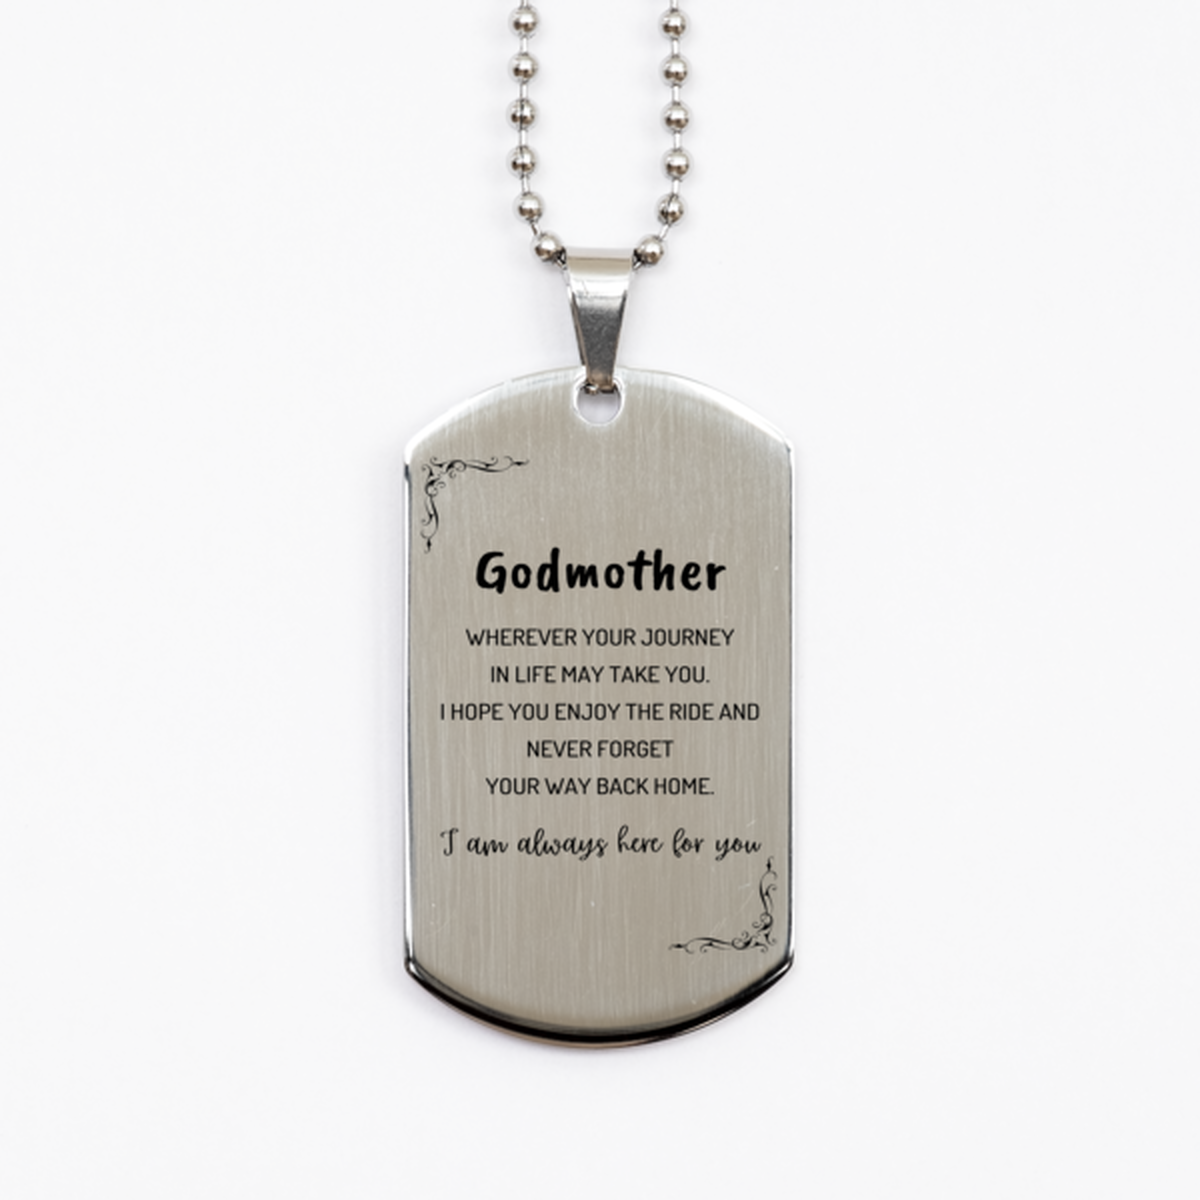 Godmother wherever your journey in life may take you, I am always here for you Godmother Silver Dog Tag, Awesome Christmas Gifts For Godmother, Godmother Birthday Gifts for Men Women Family Loved One